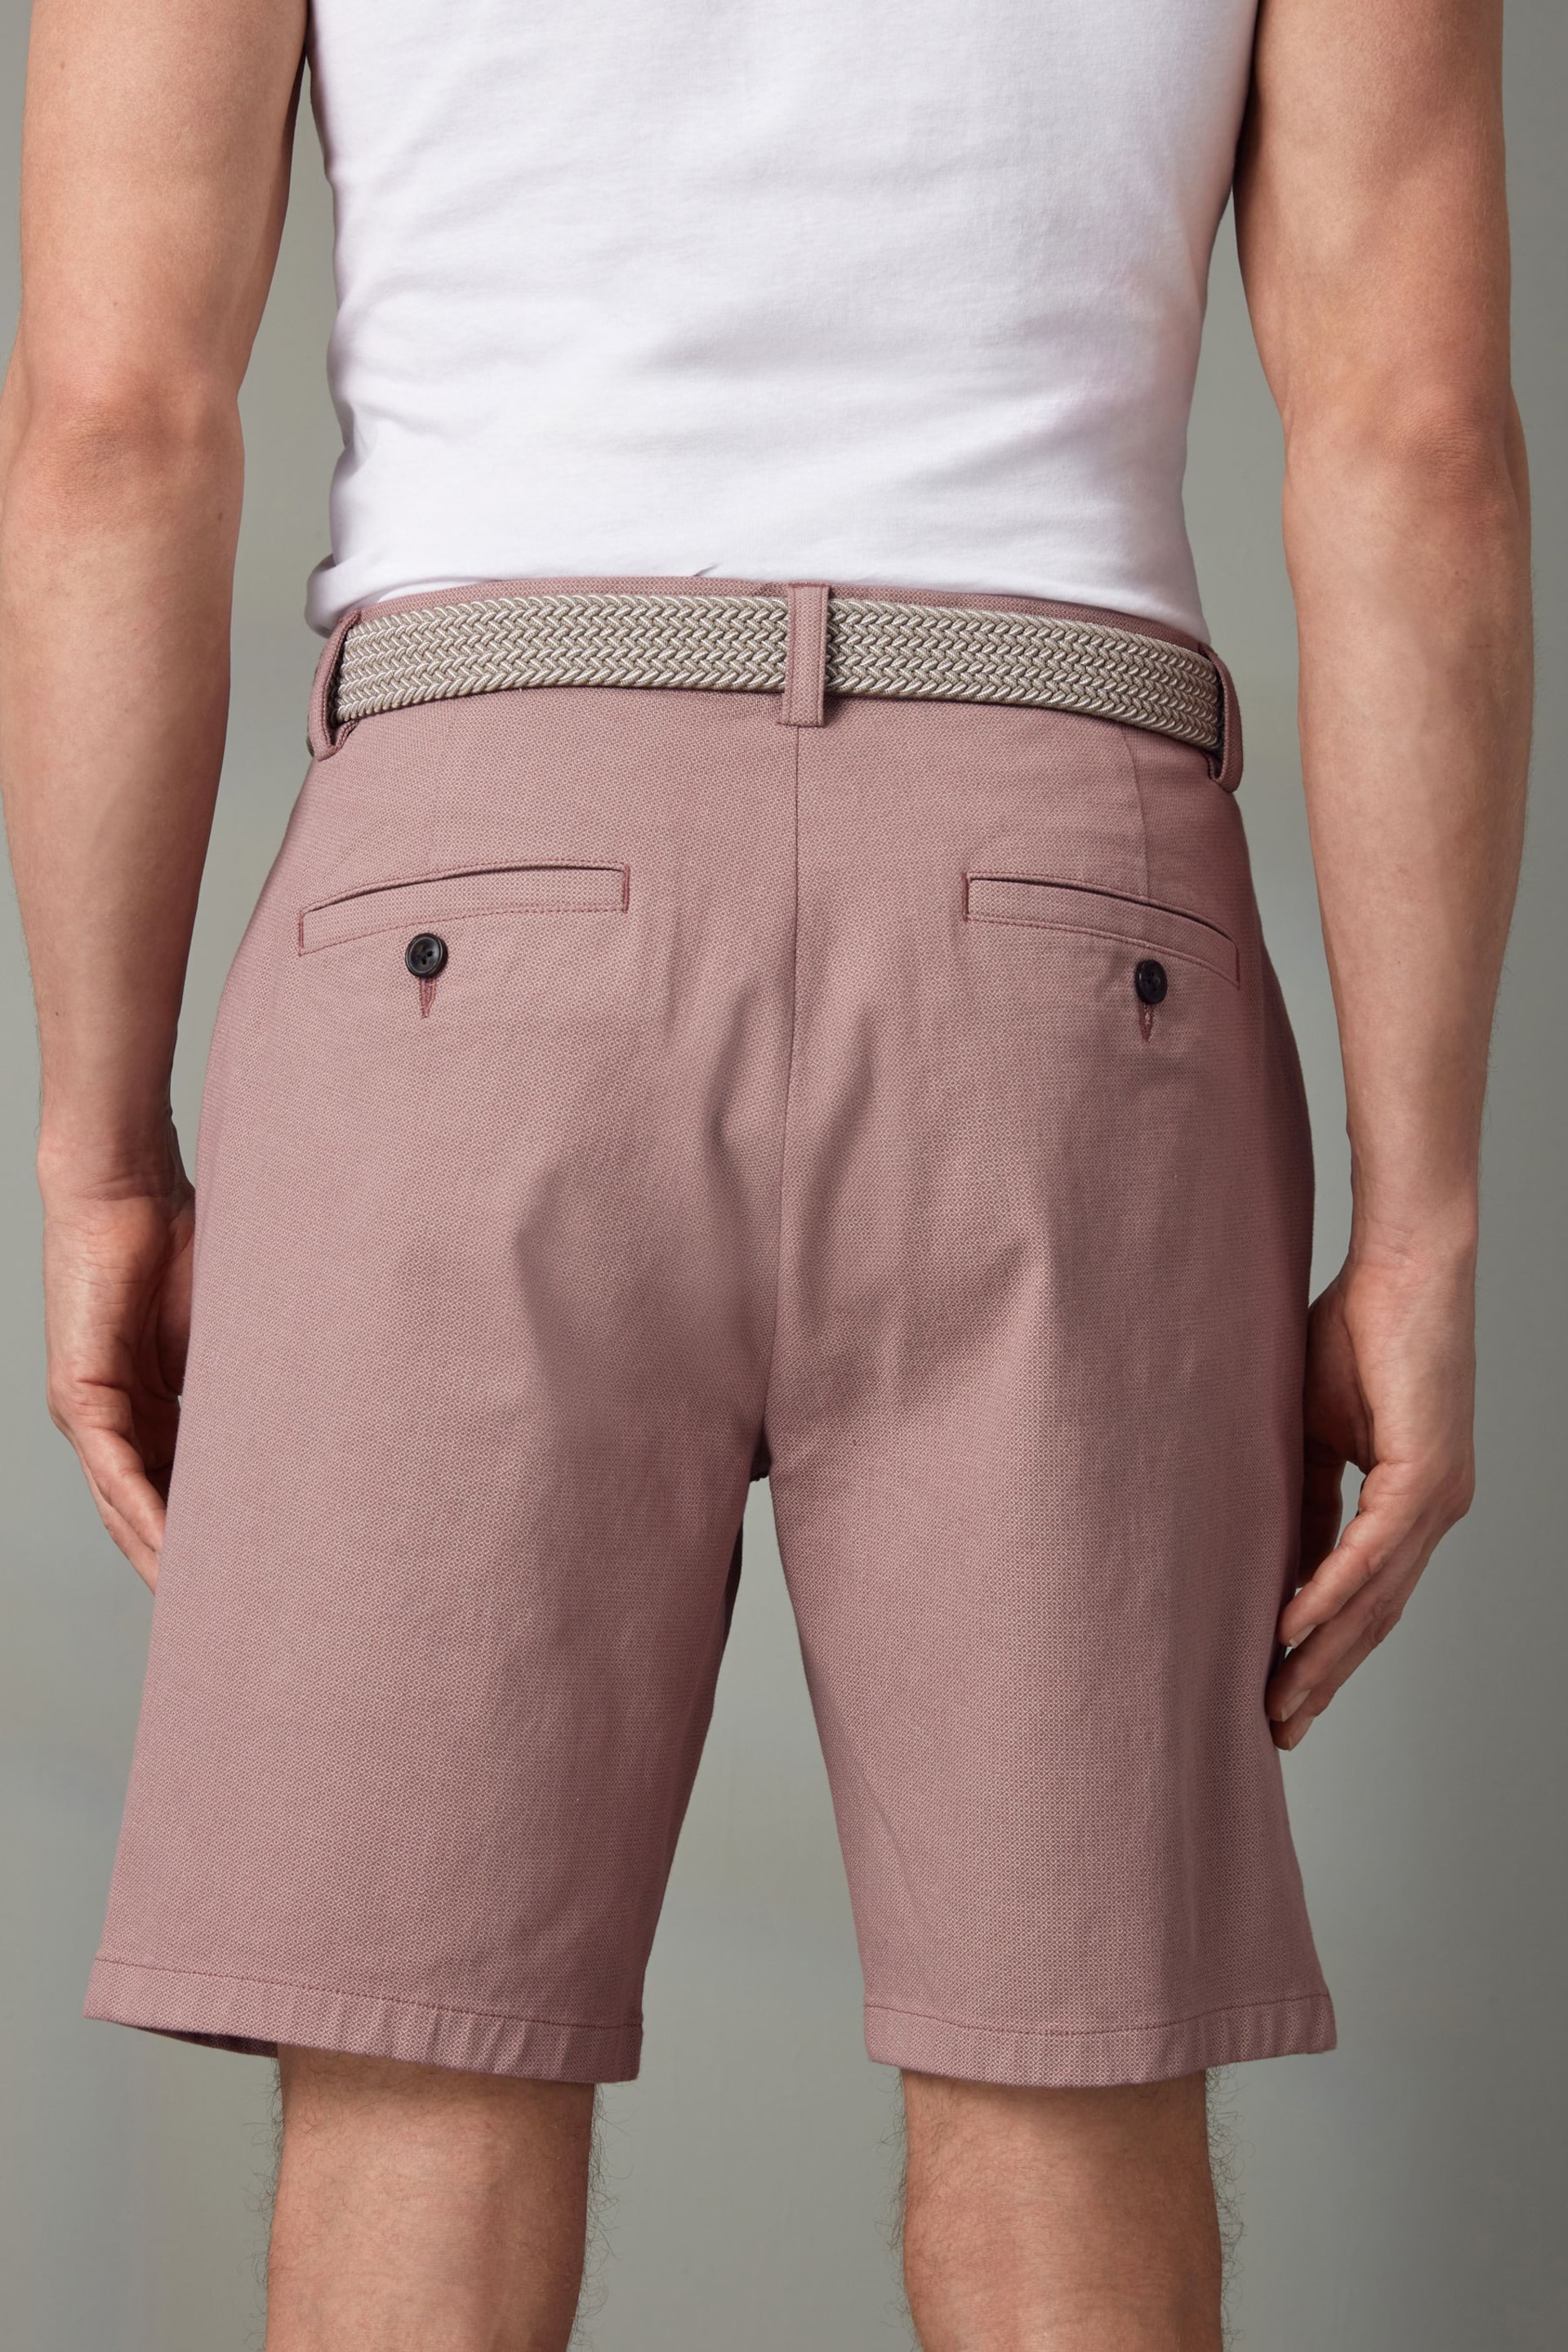 Pink Textured Cotton Blend Chino Shorts with Belt Included - Image 5 of 9